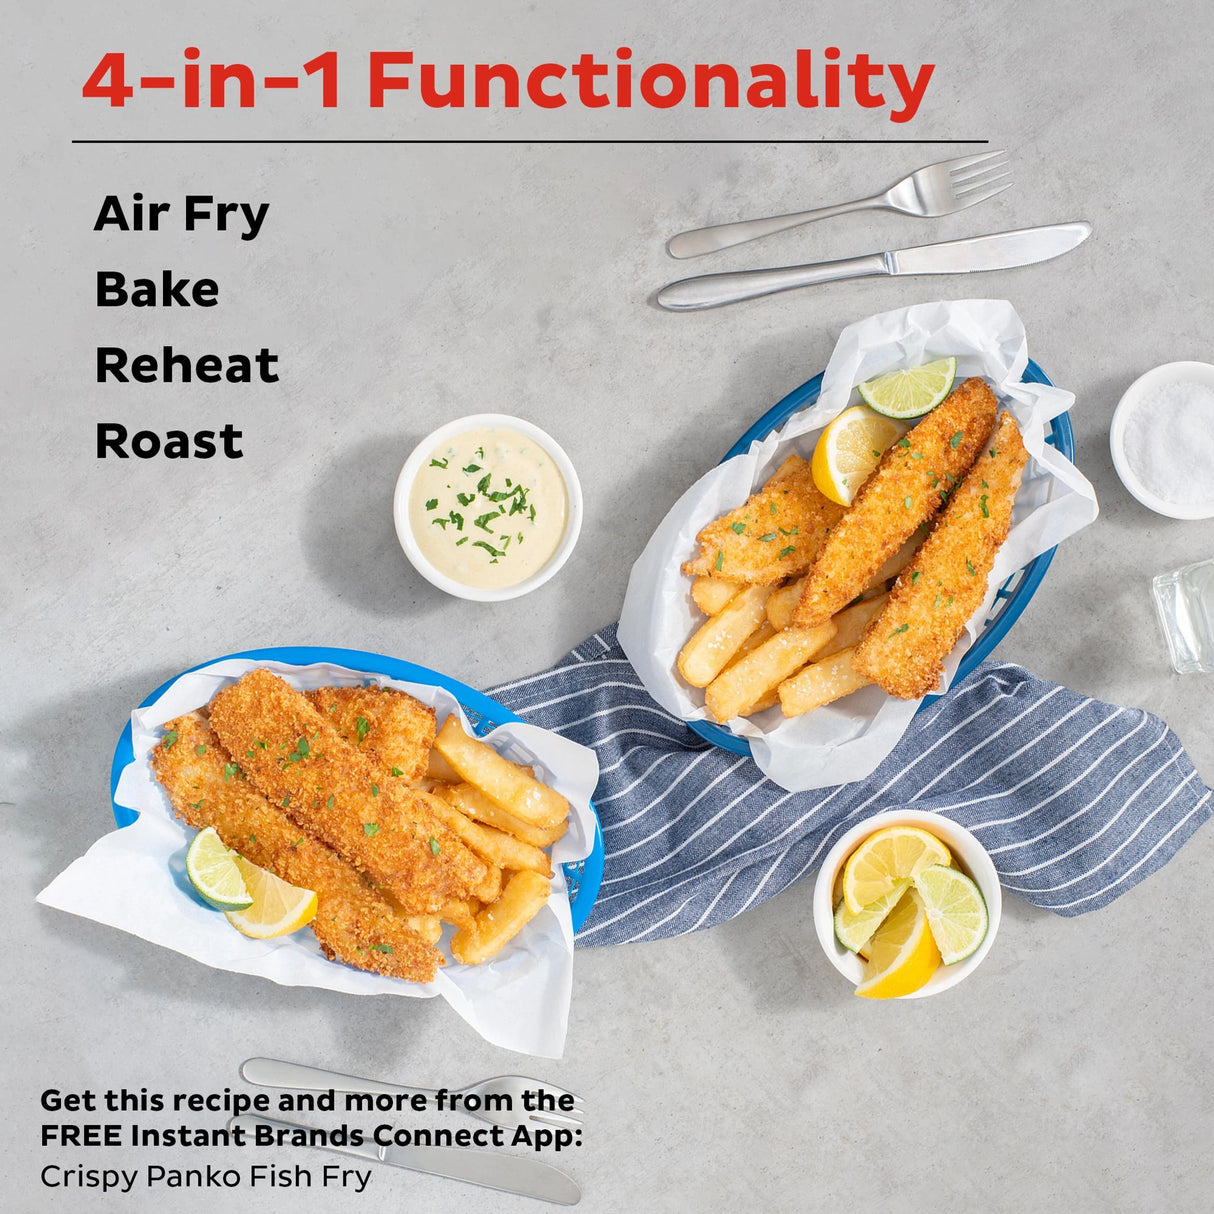  Instant™ Vortex™ 5.7-quart Air Fryer  with 4-1-1 functionality